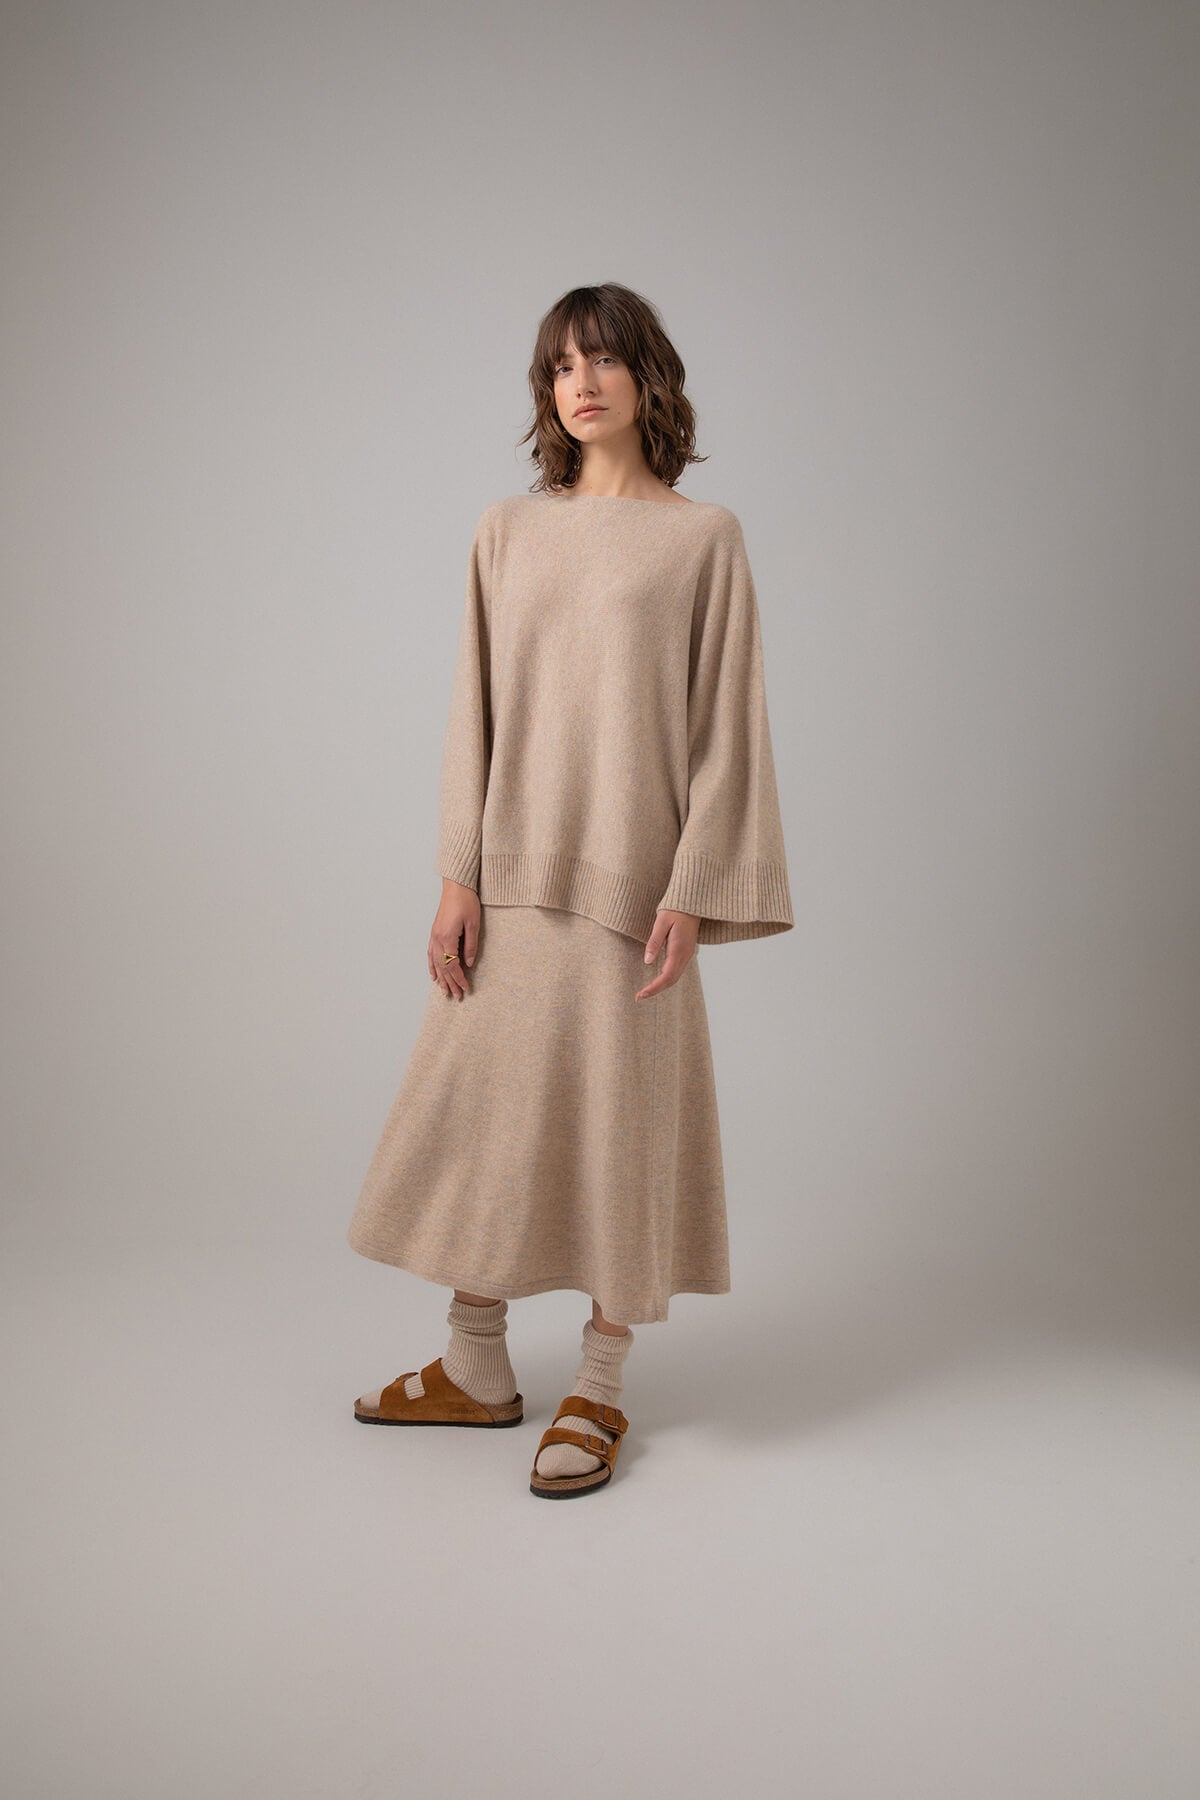 Johnstons of Elgin Boat Neck Cashmere Cape Jumper in Oatmeal worn with a matching A-Line Skirt on a grey background KAI05048HB0210